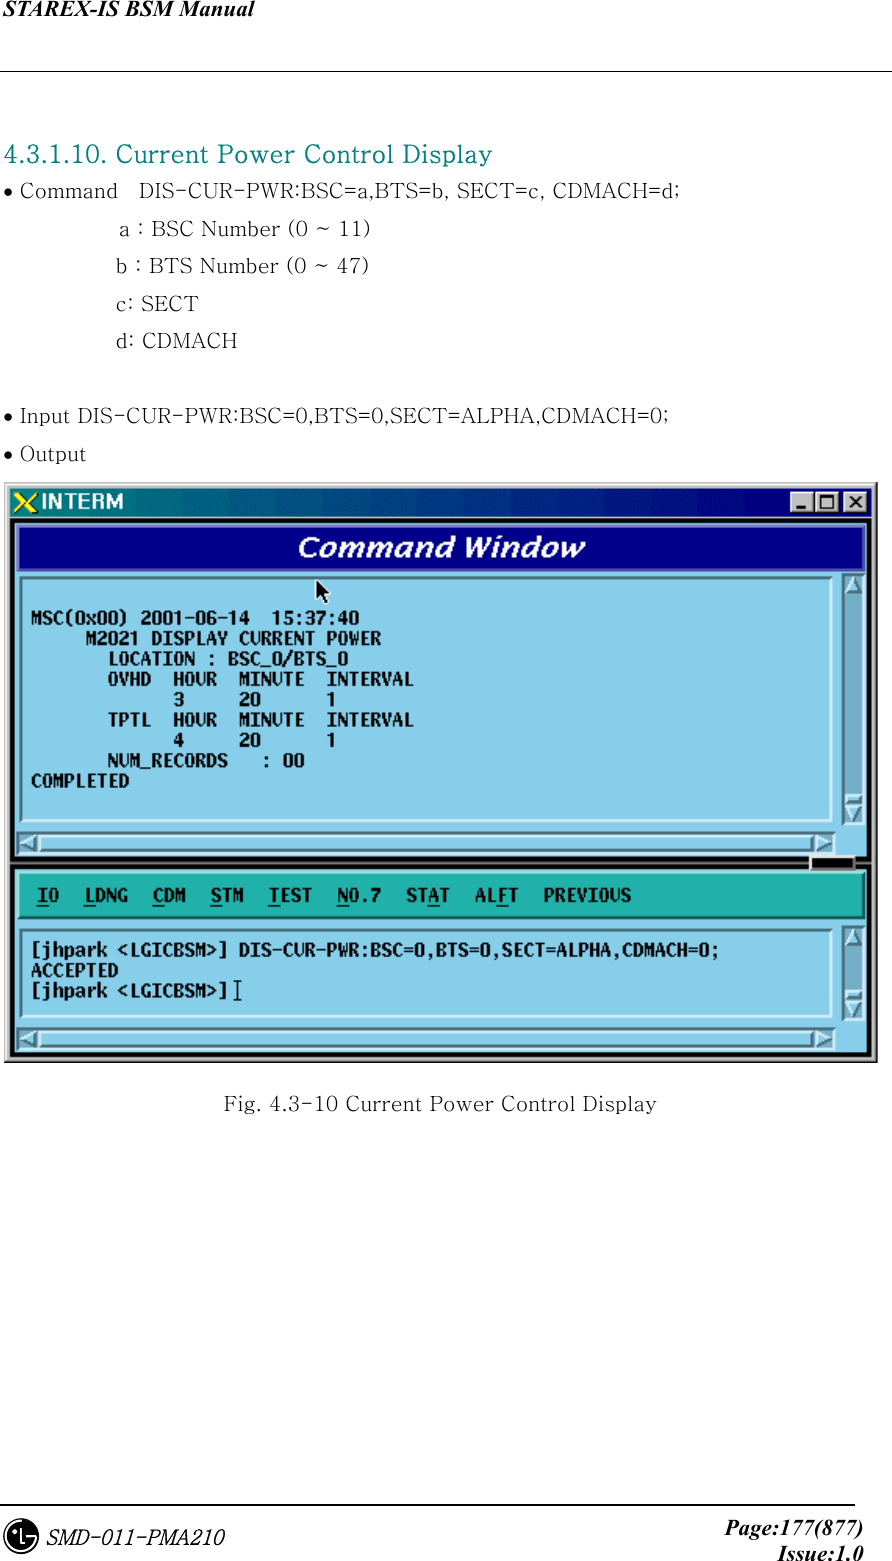 STAREX-IS BSM Manual     Page:177(877)Issue:1.0SMD-011-PMA210  4.3.1.10. Current Power Control Display • Command    DIS-CUR-PWR:BSC=a,BTS=b, SECT=c, CDMACH=d;            a : BSC Number (0 ~ 11) b : BTS Number (0 ~ 47) c: SECT d: CDMACH             • Input DIS-CUR-PWR:BSC=0,BTS=0,SECT=ALPHA,CDMACH=0; • Output  Fig. 4.3-10 Current Power Control Display 